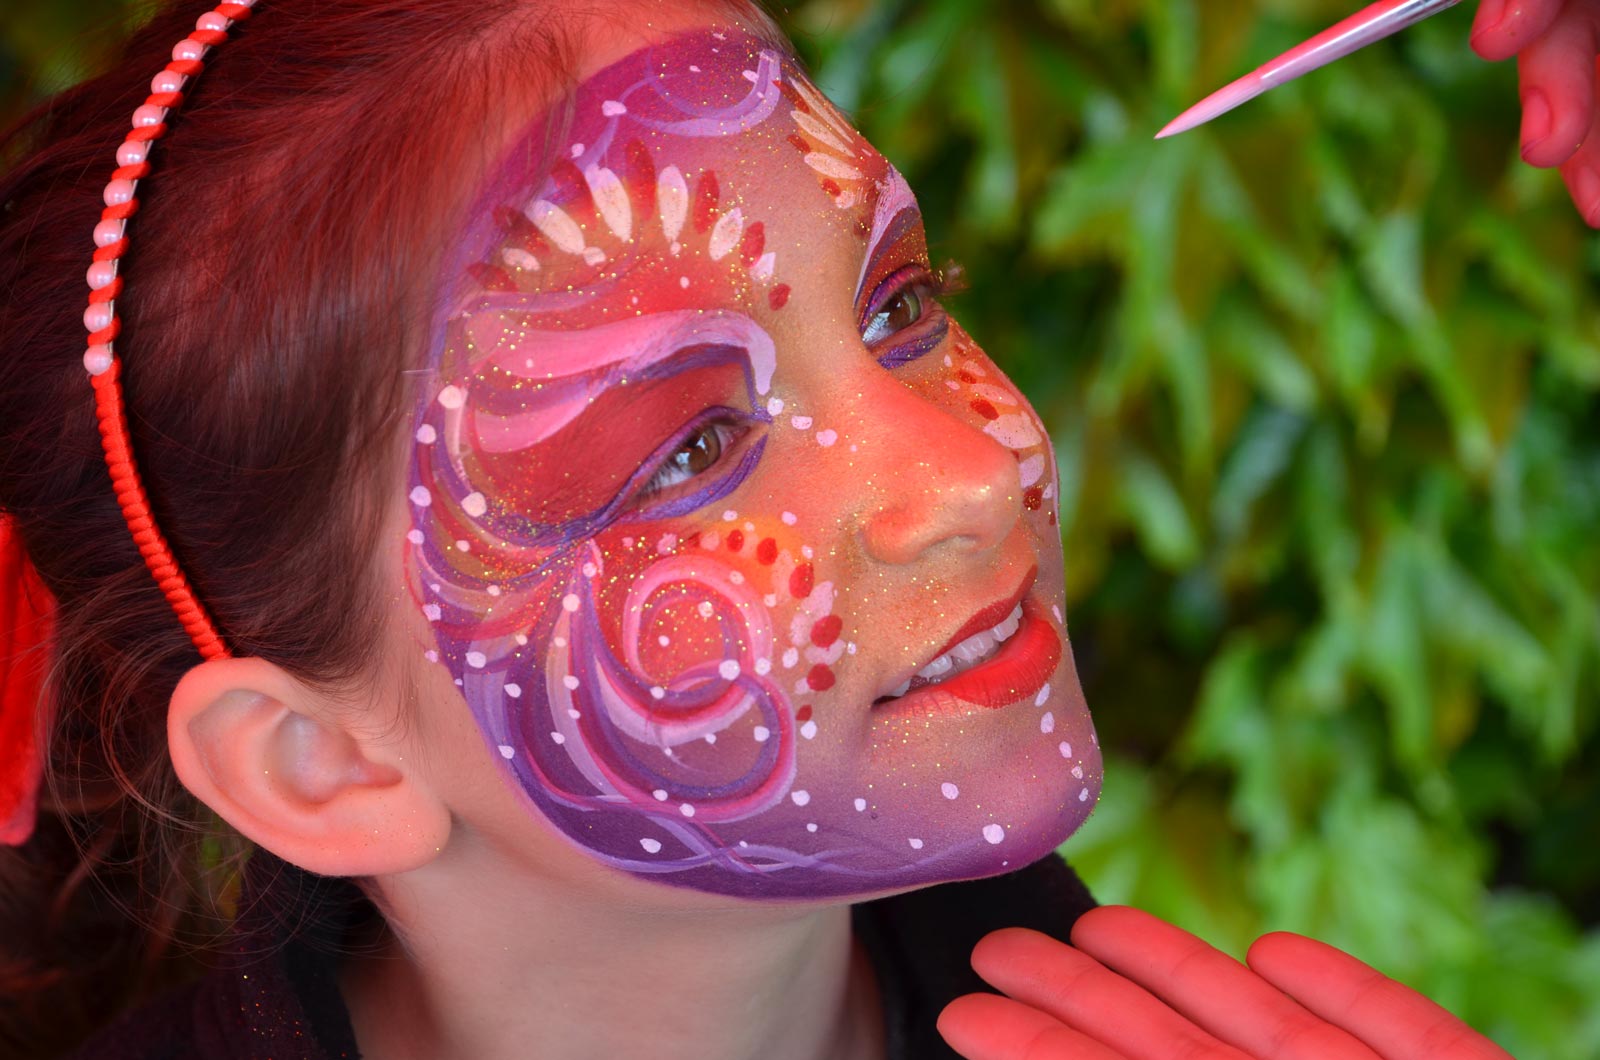 Truccabimbi Face Painting - Fem Spettacoli - Face painting, body painting